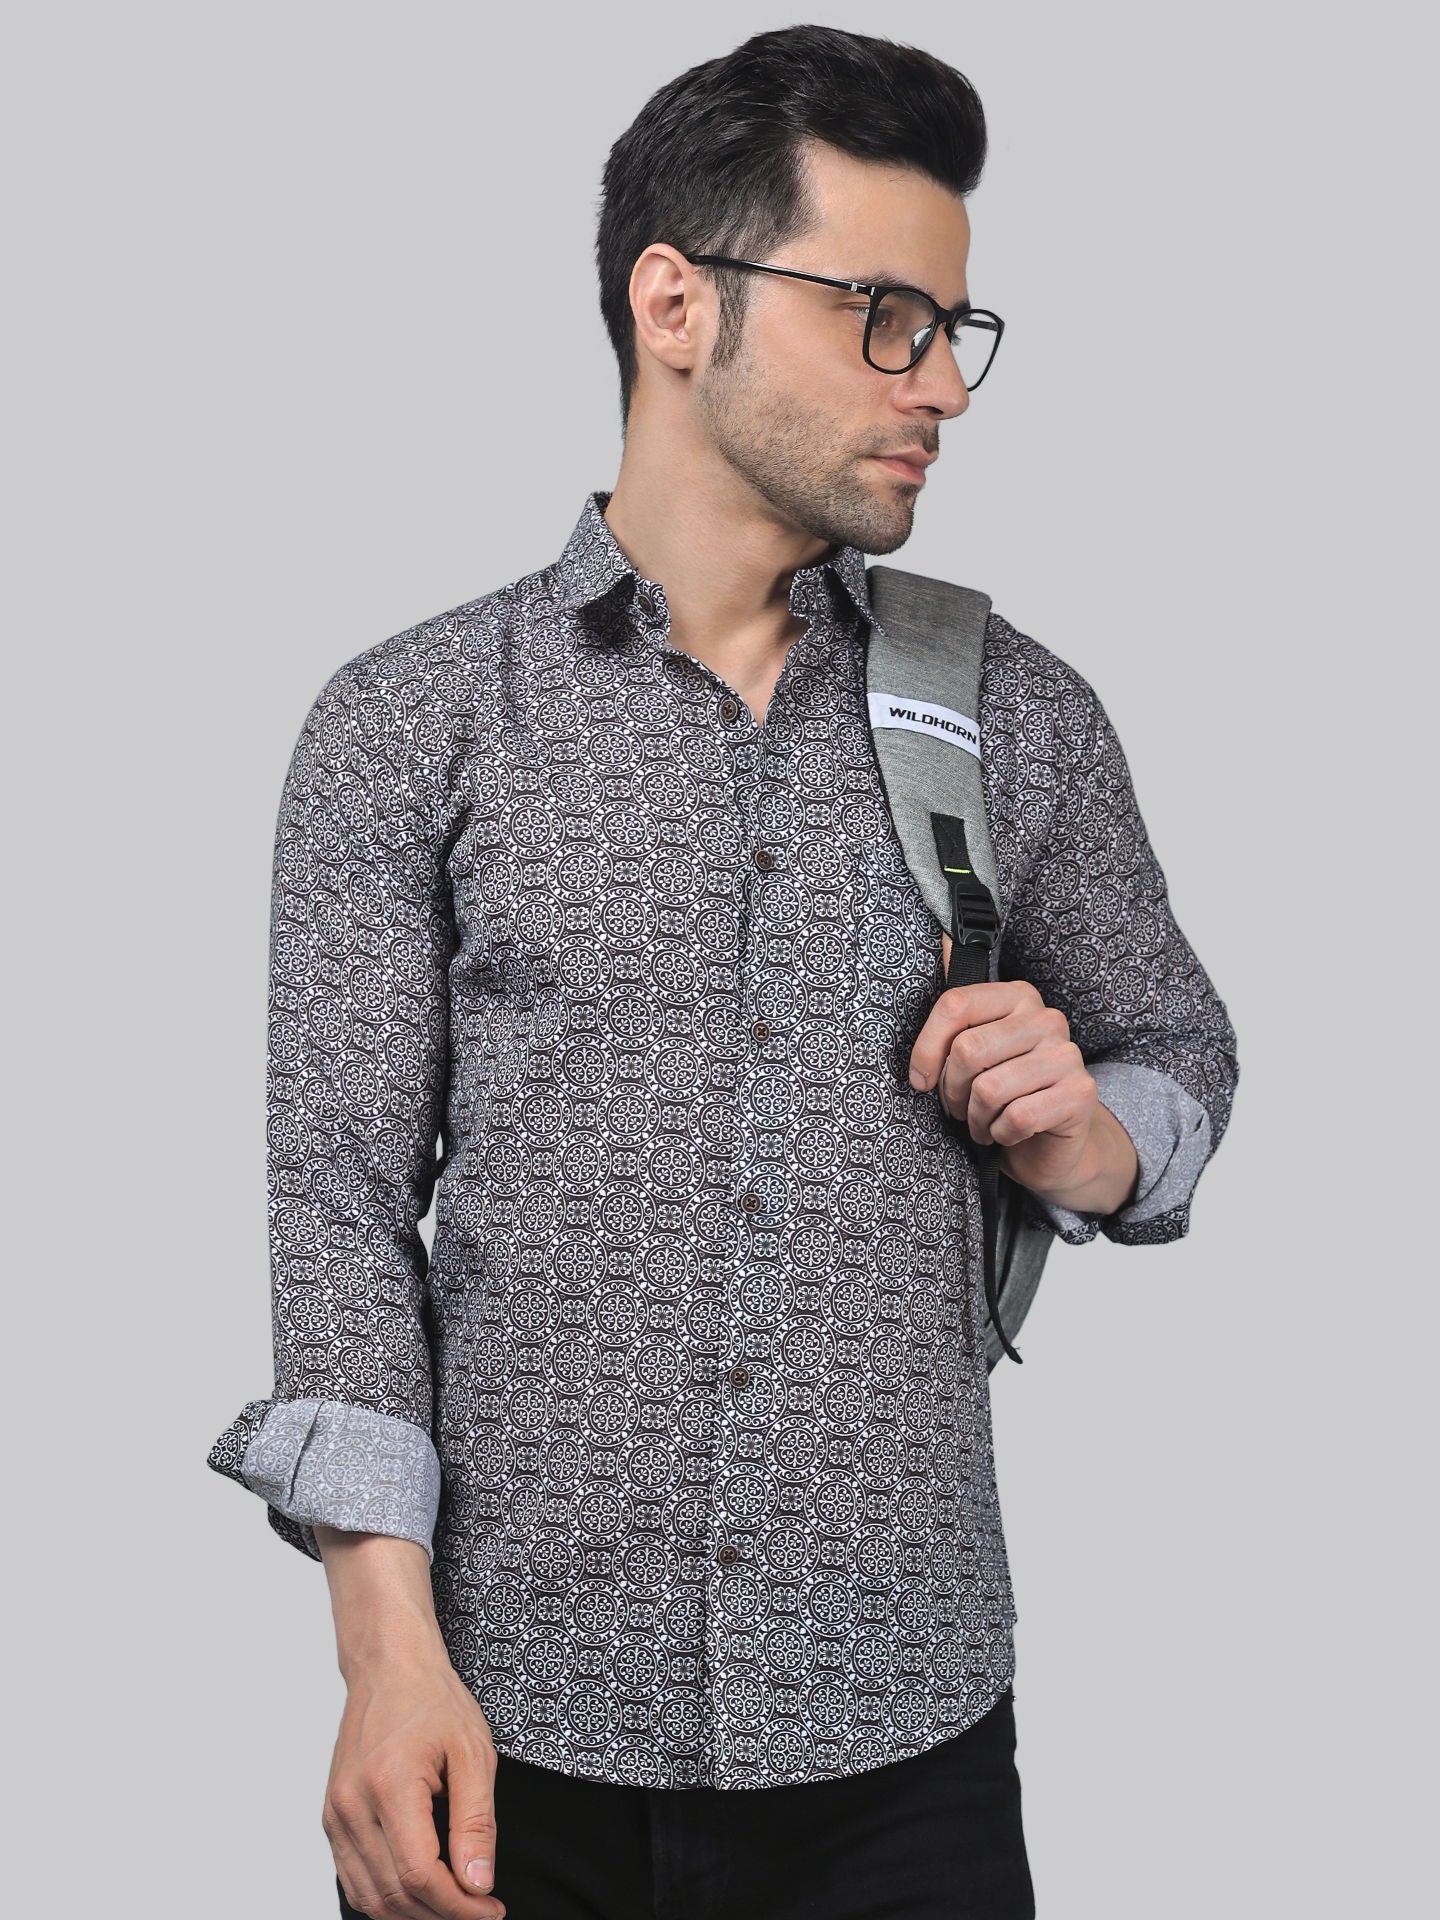 TryBuy Luxe Edition Men's Linen Casual Printed Full Sleeves Shirt - TryBuy® USA🇺🇸